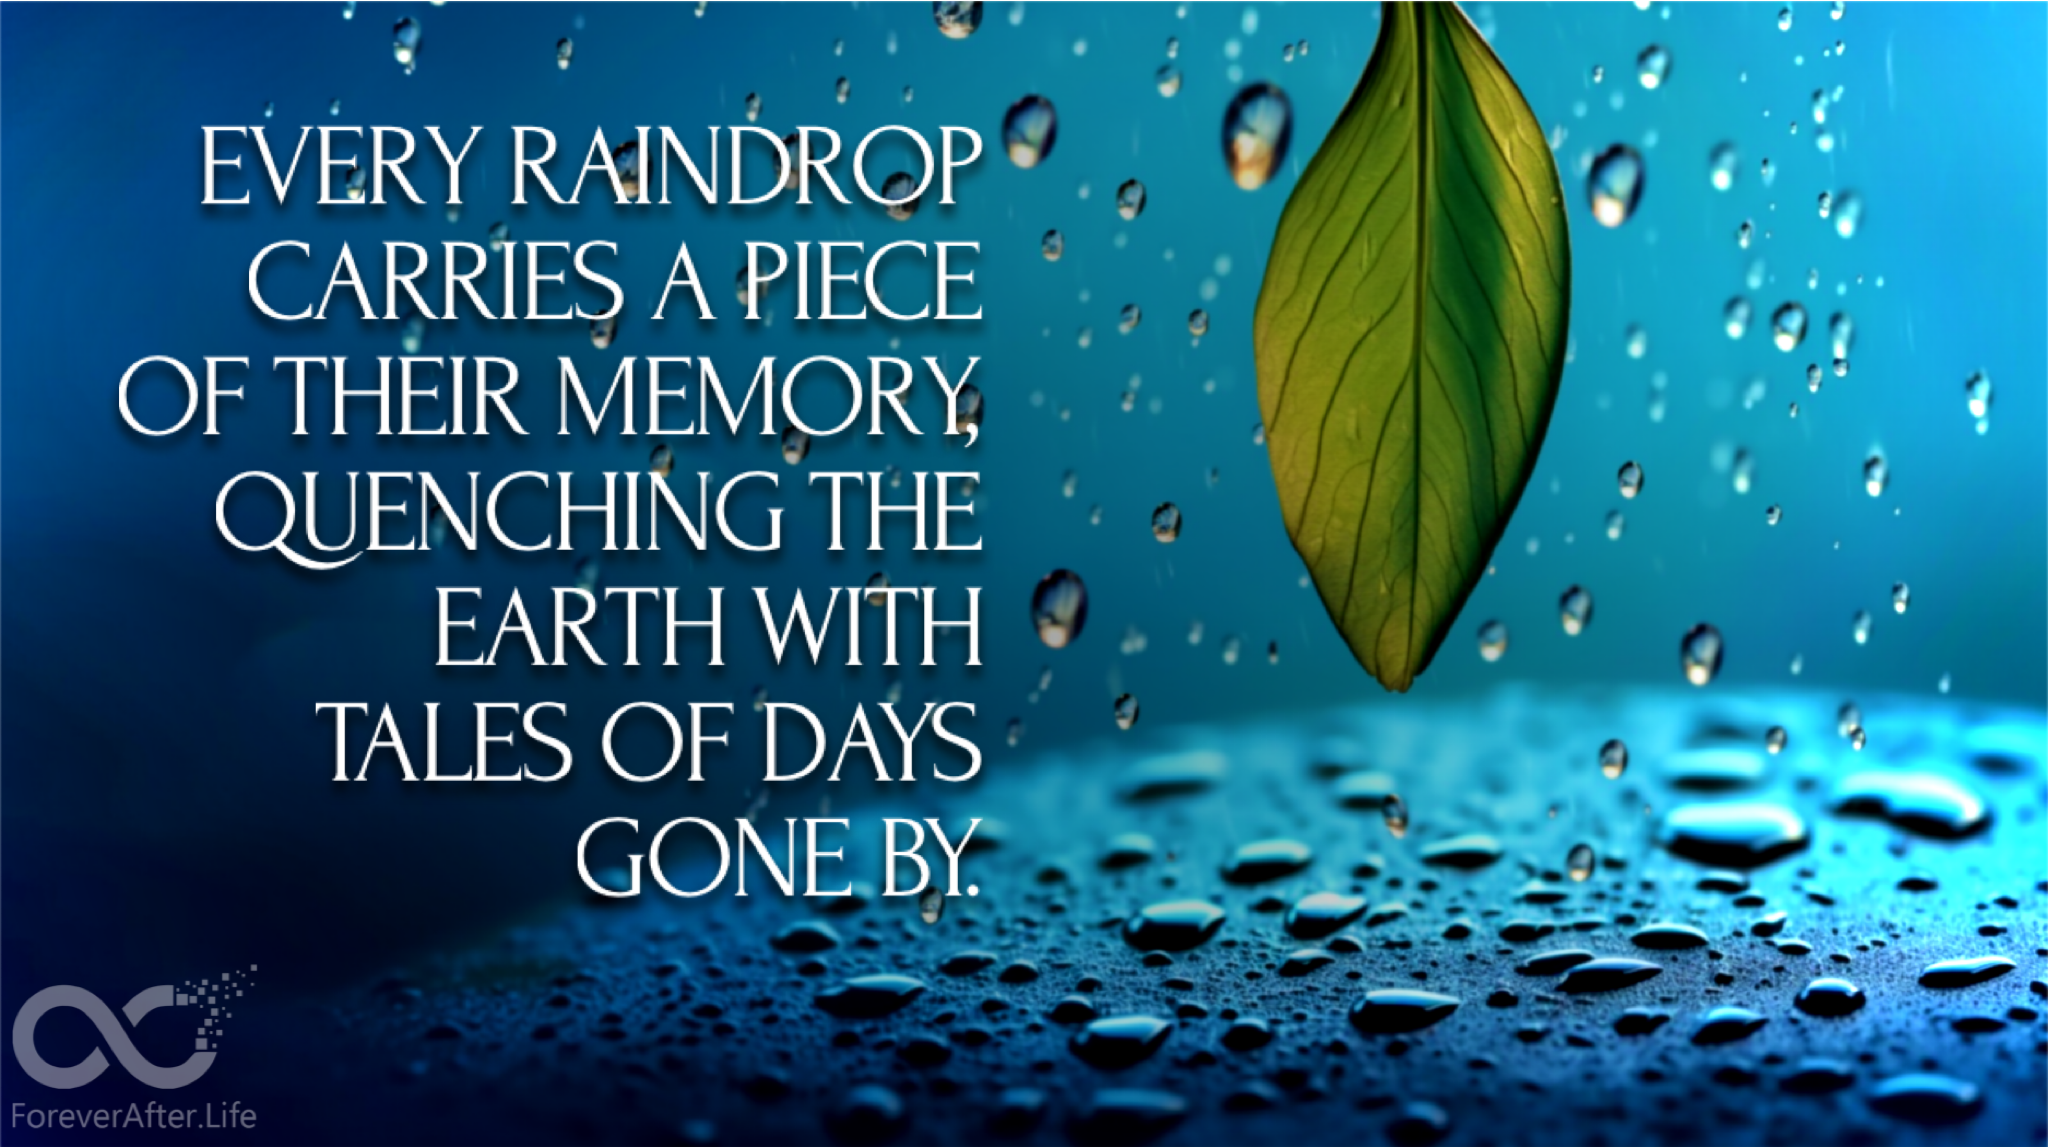 Every raindrop carries a piece of their memory, quenching the earth with tales of days gone by.